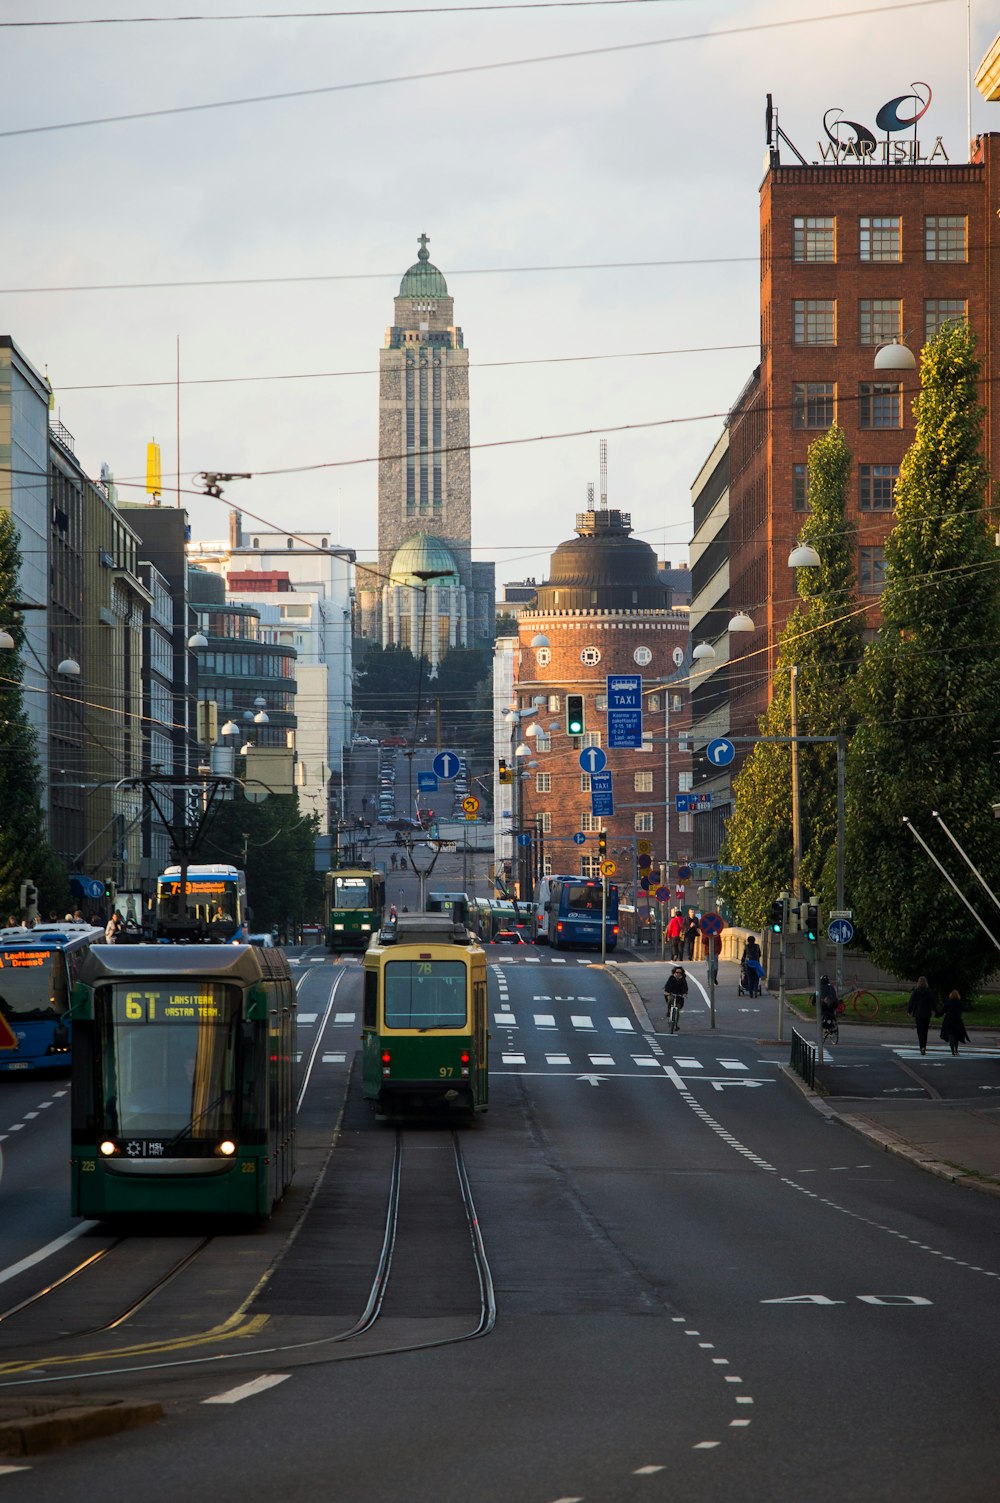 green and yellow tram on road near high rise buildings during daytime